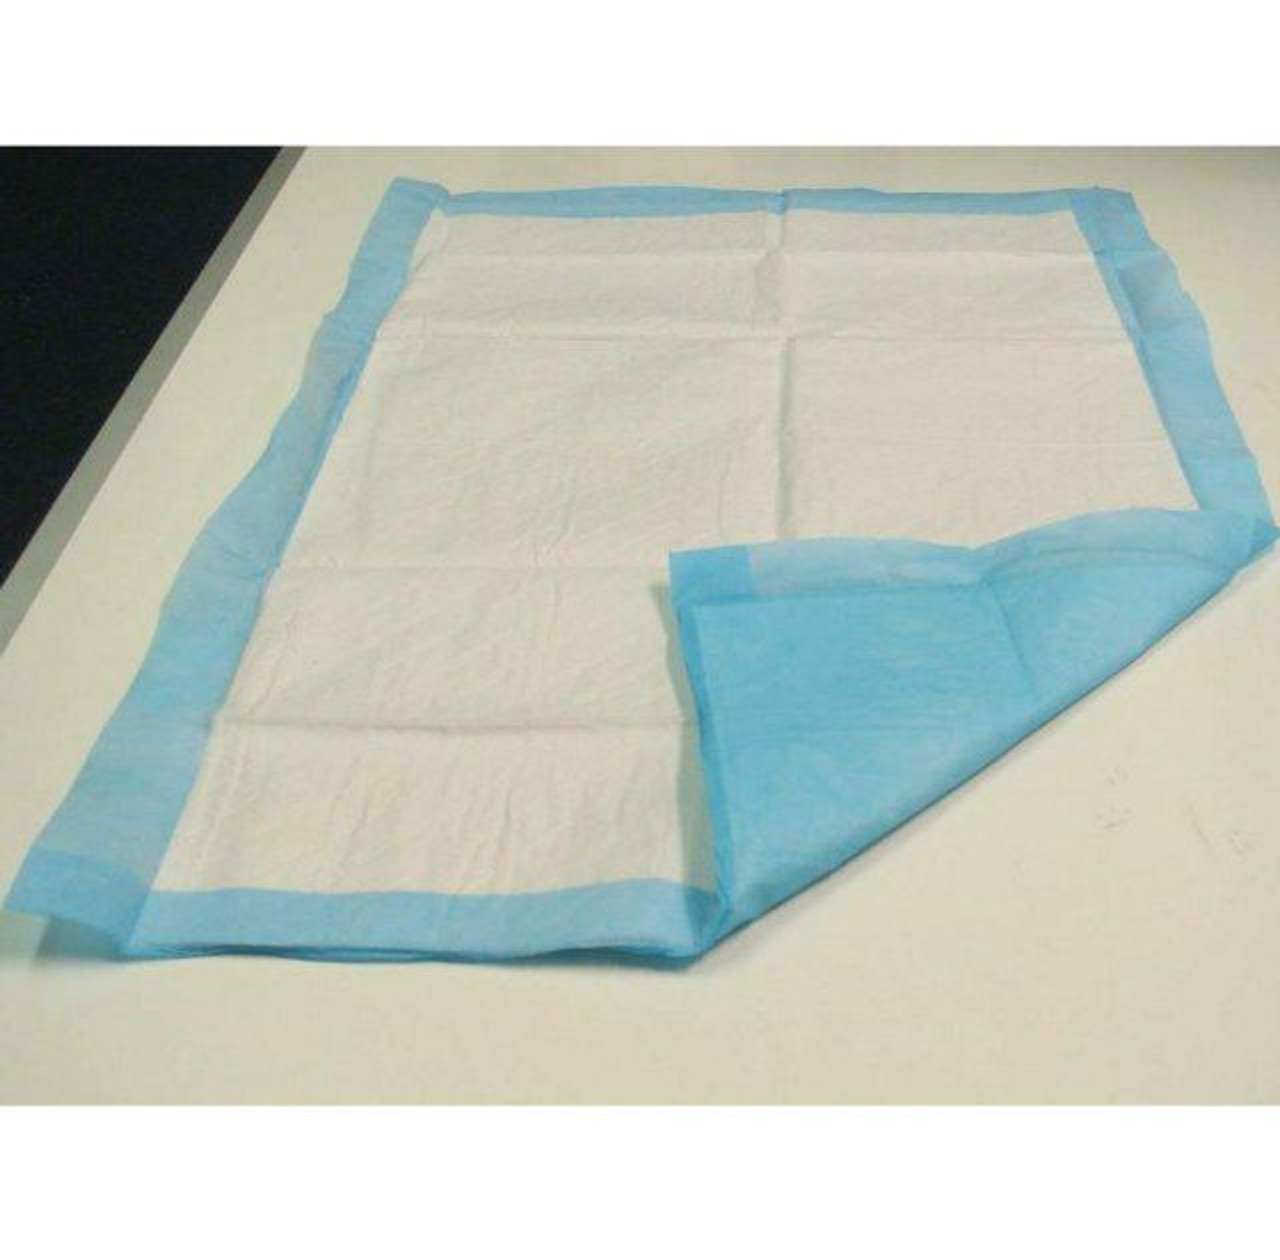 60 PACK 45X60CM DISPOSABLE BABY CHANGING MATS TRAVEL INCONTINENCE BED  SHEETS UK